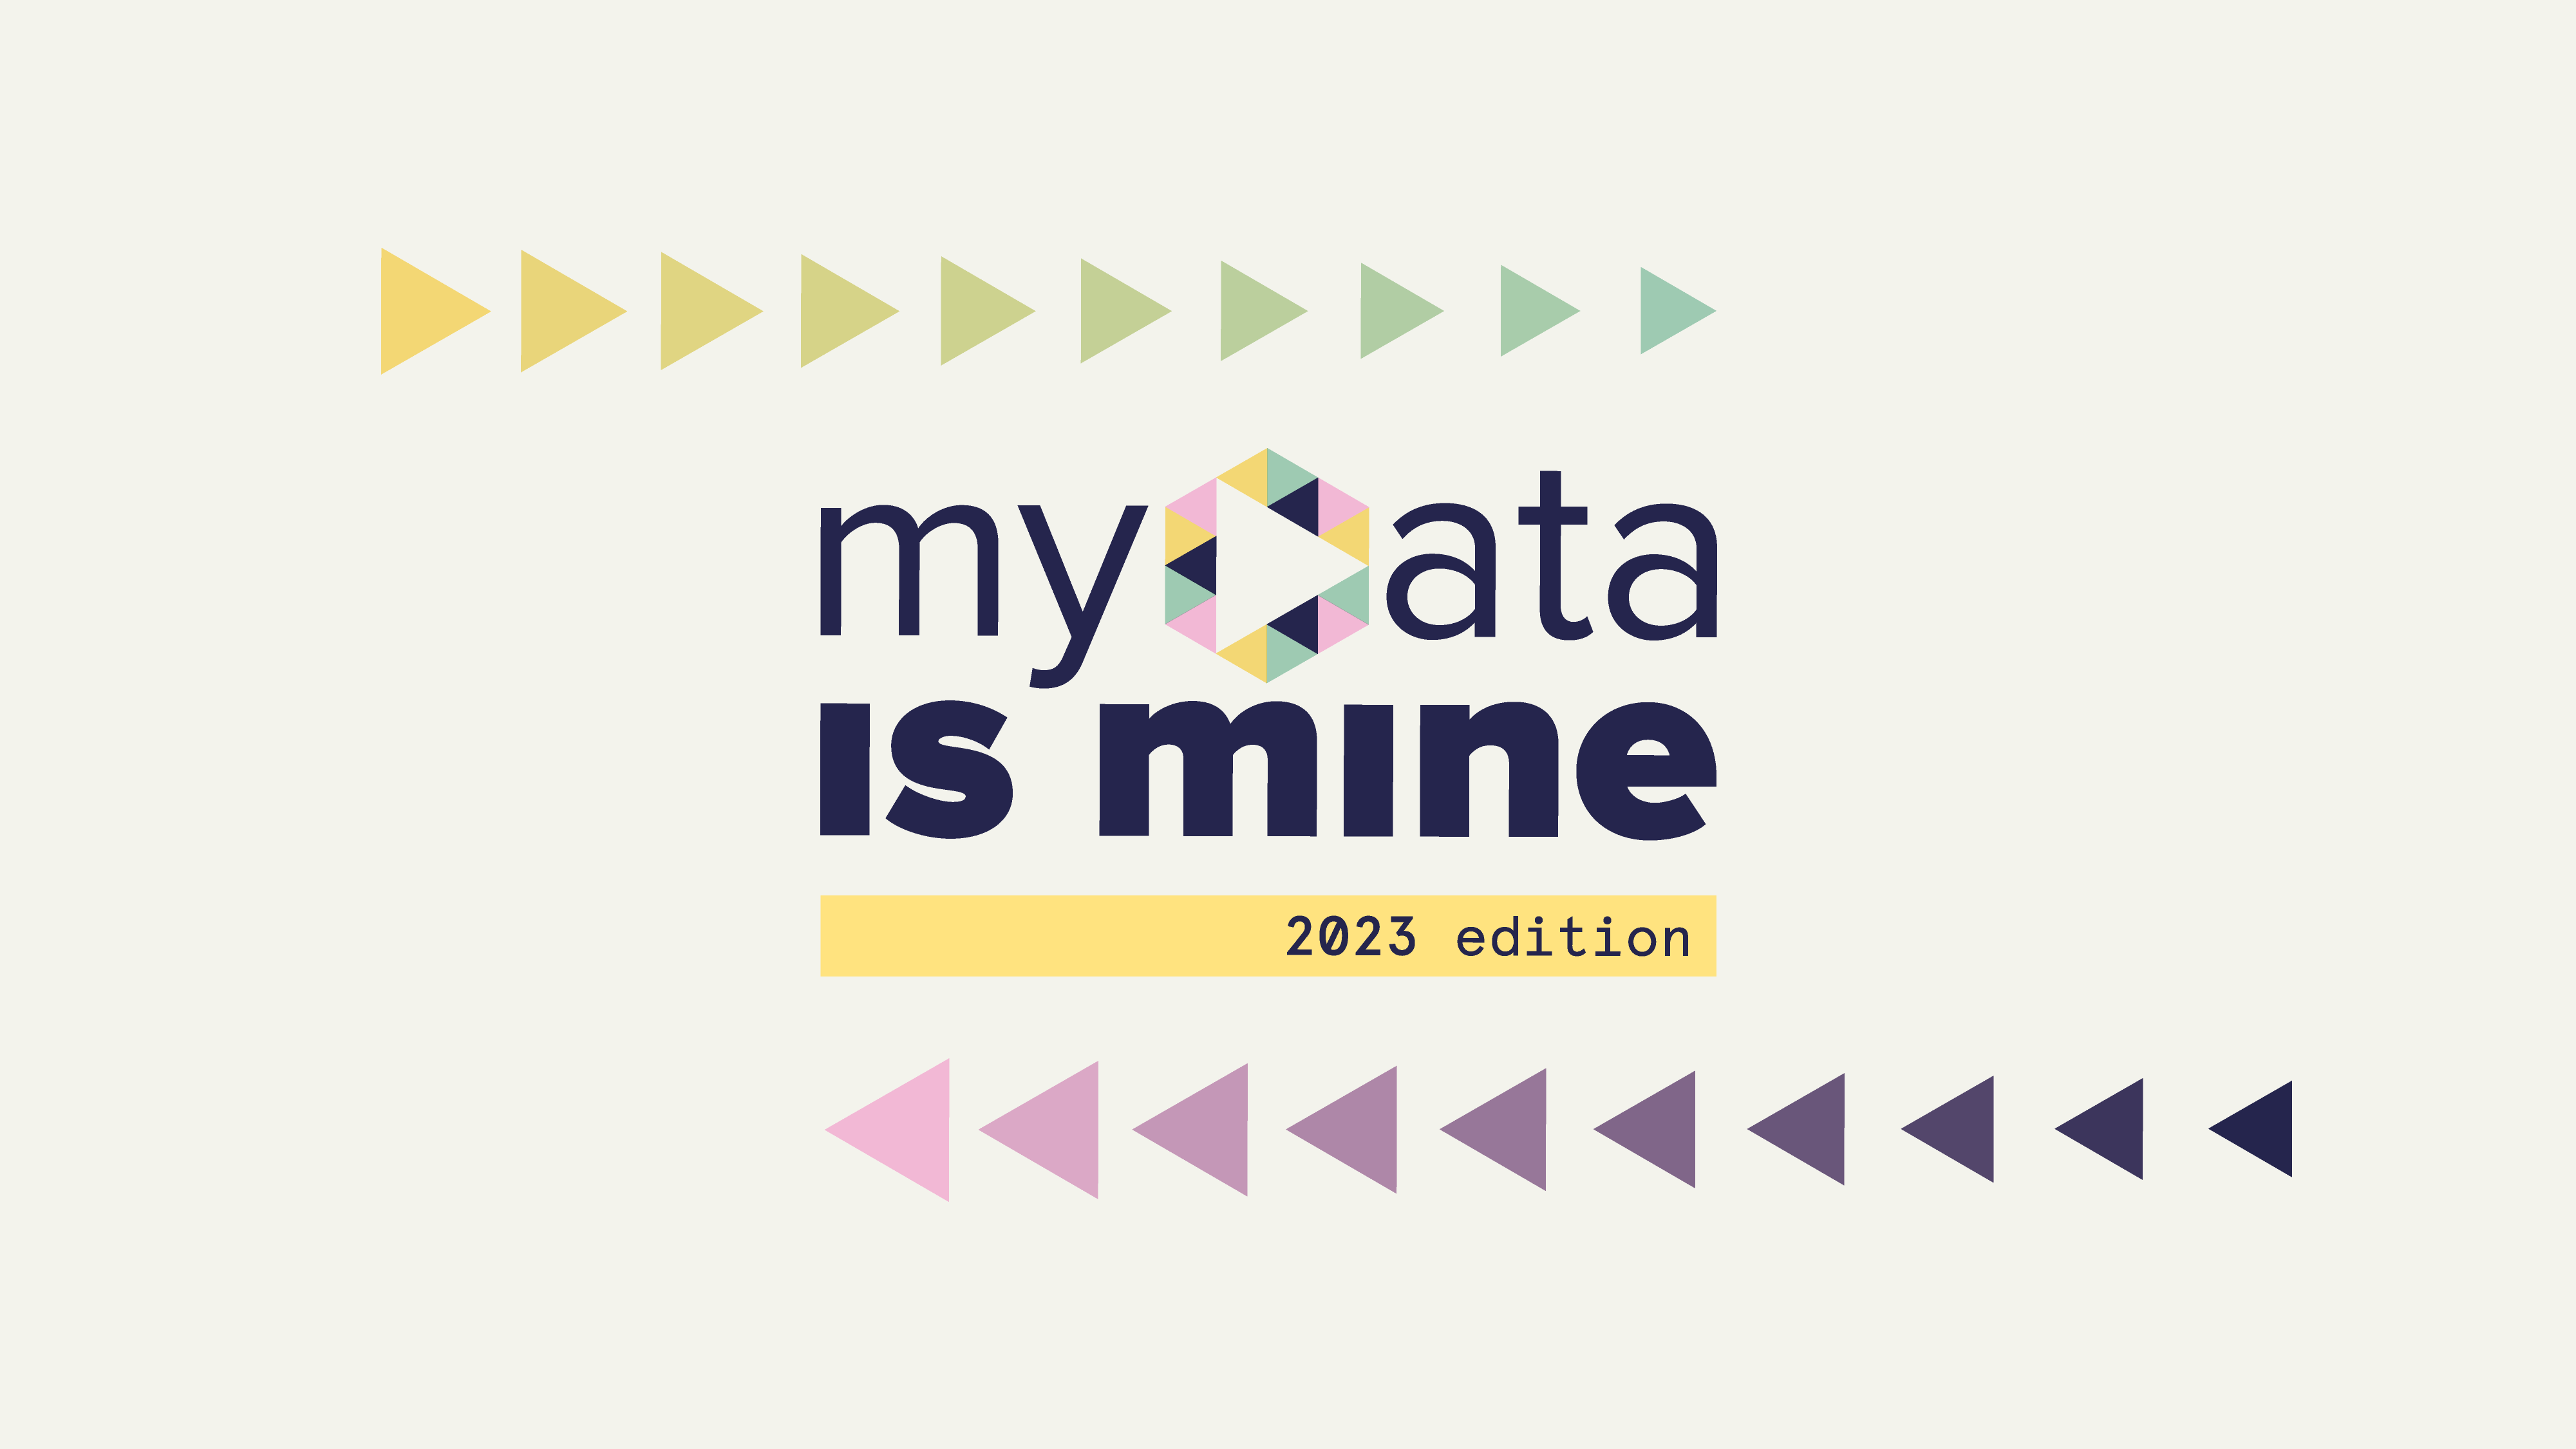 My data is mine 2023 edition call for papers